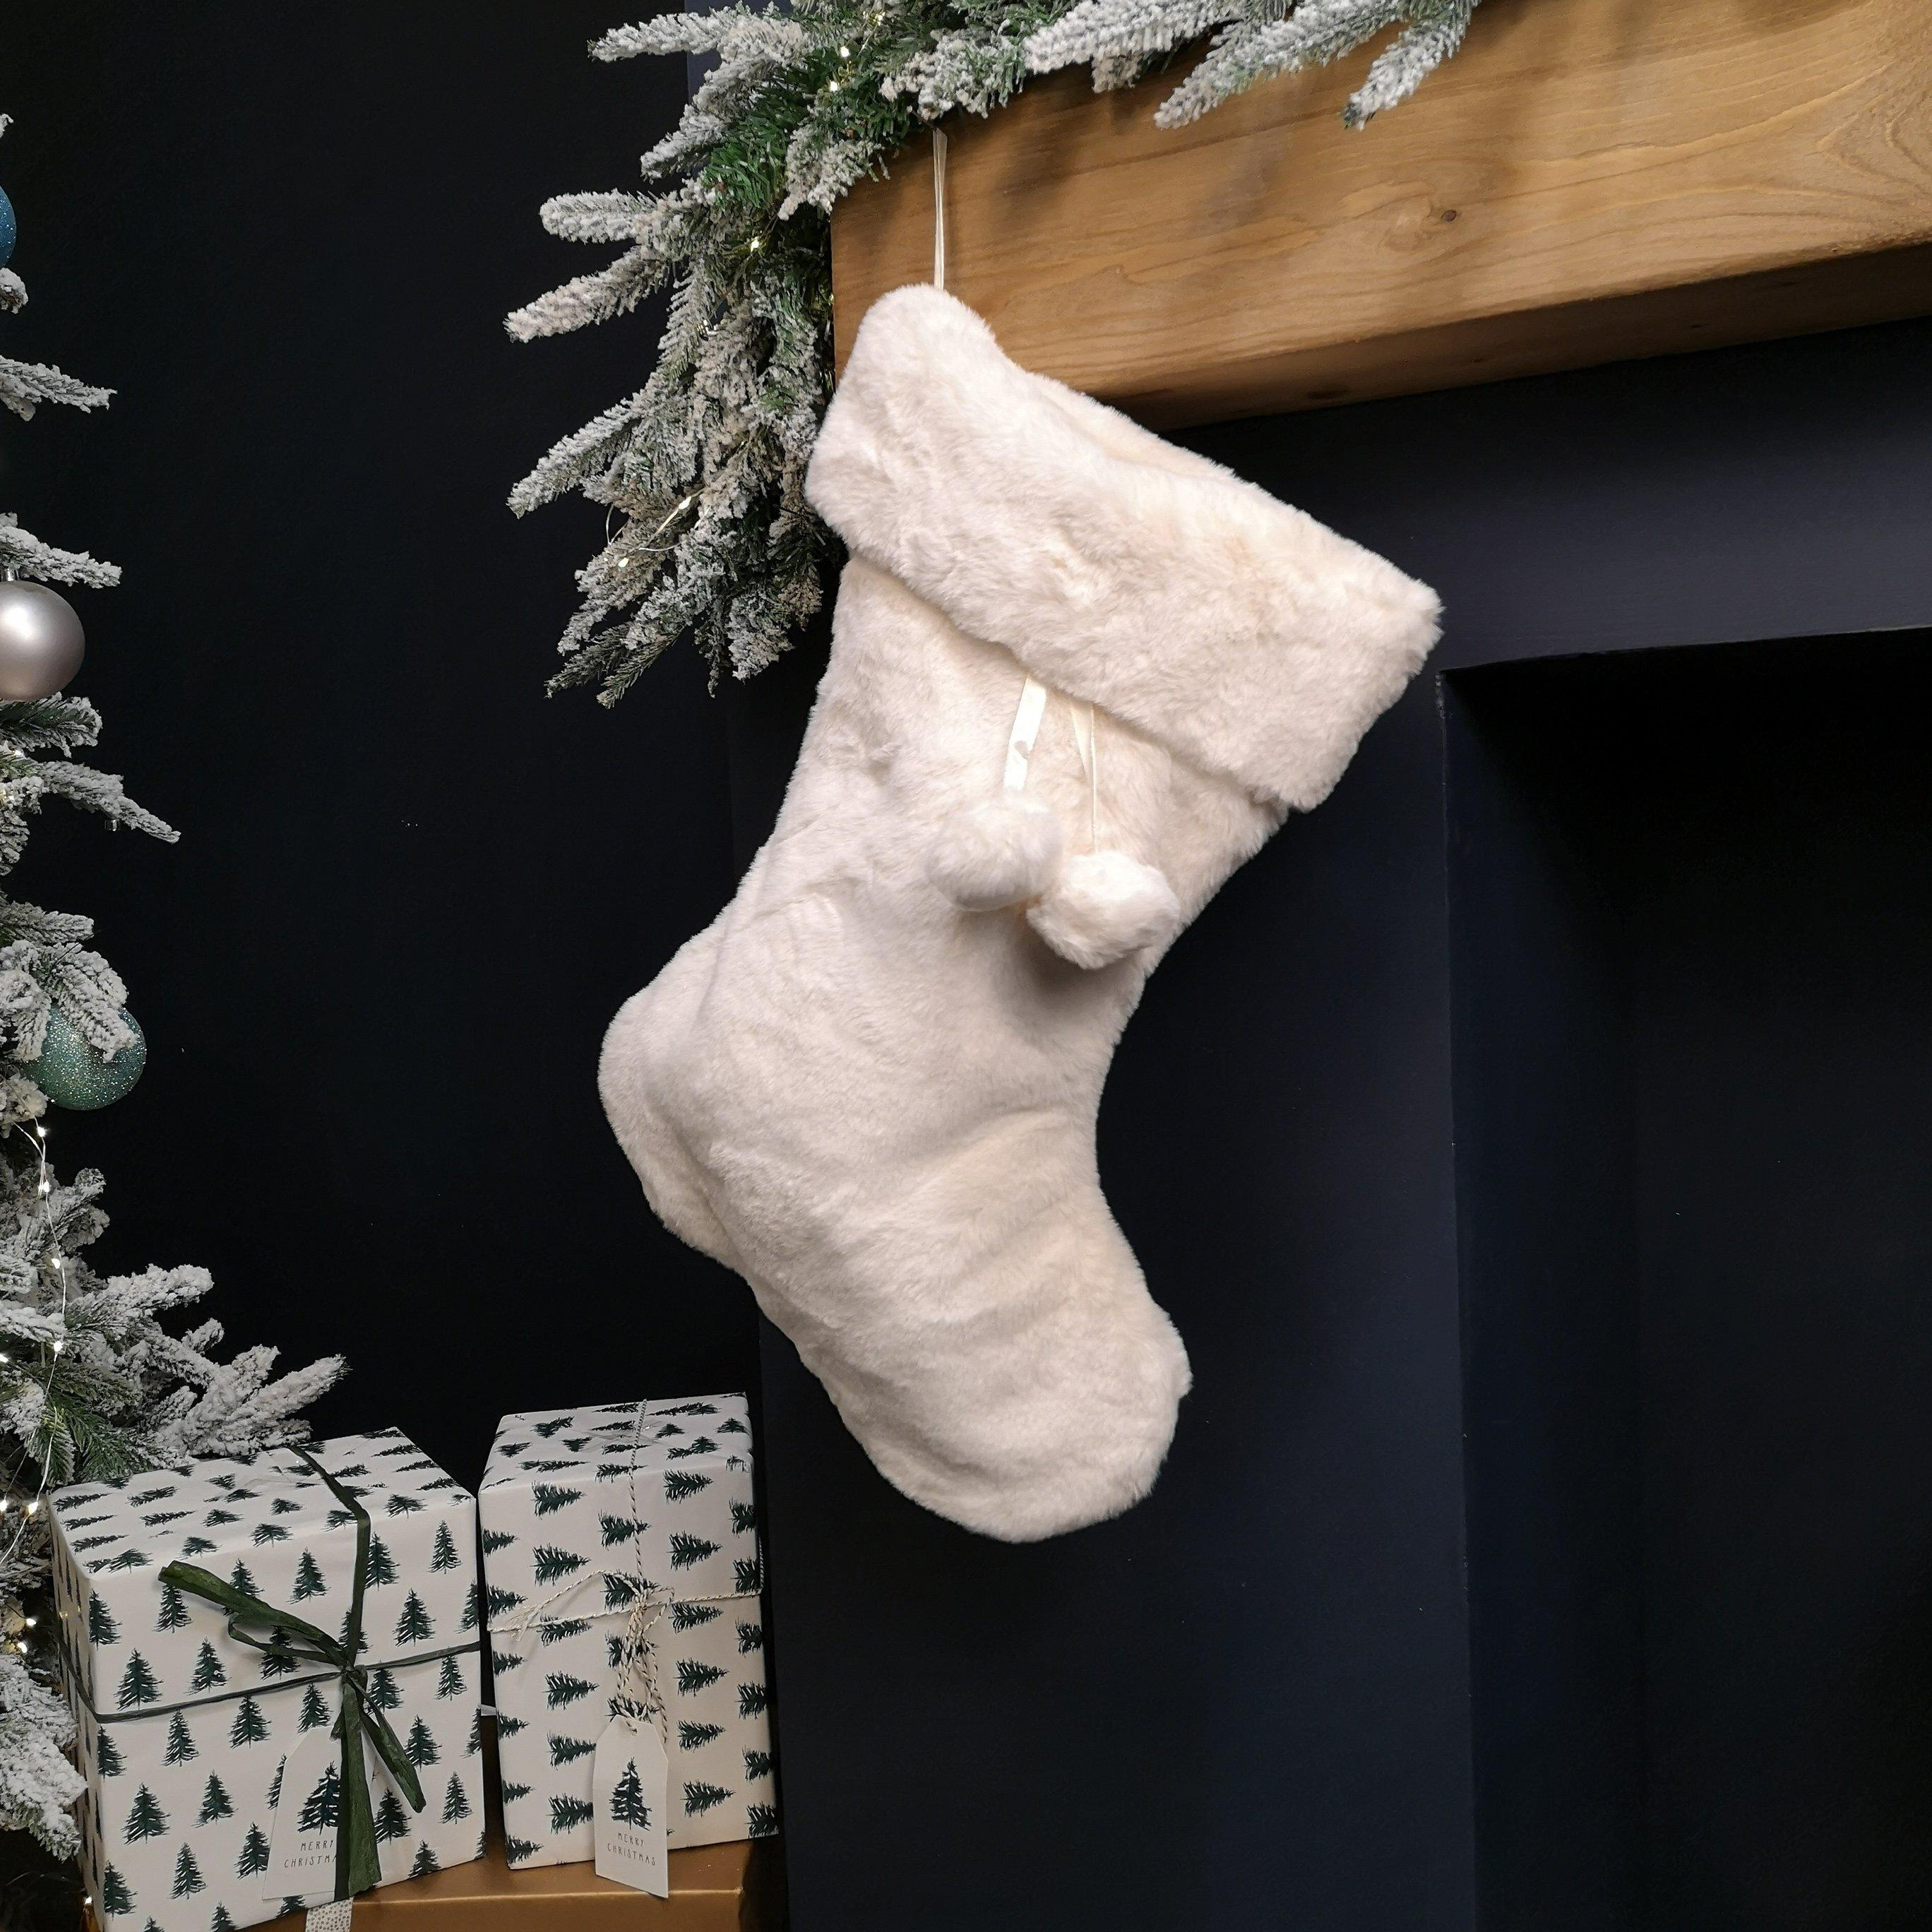 50cm Winter White Faux Fur Hanging Christmas Stocking with Pom Poms - image 1